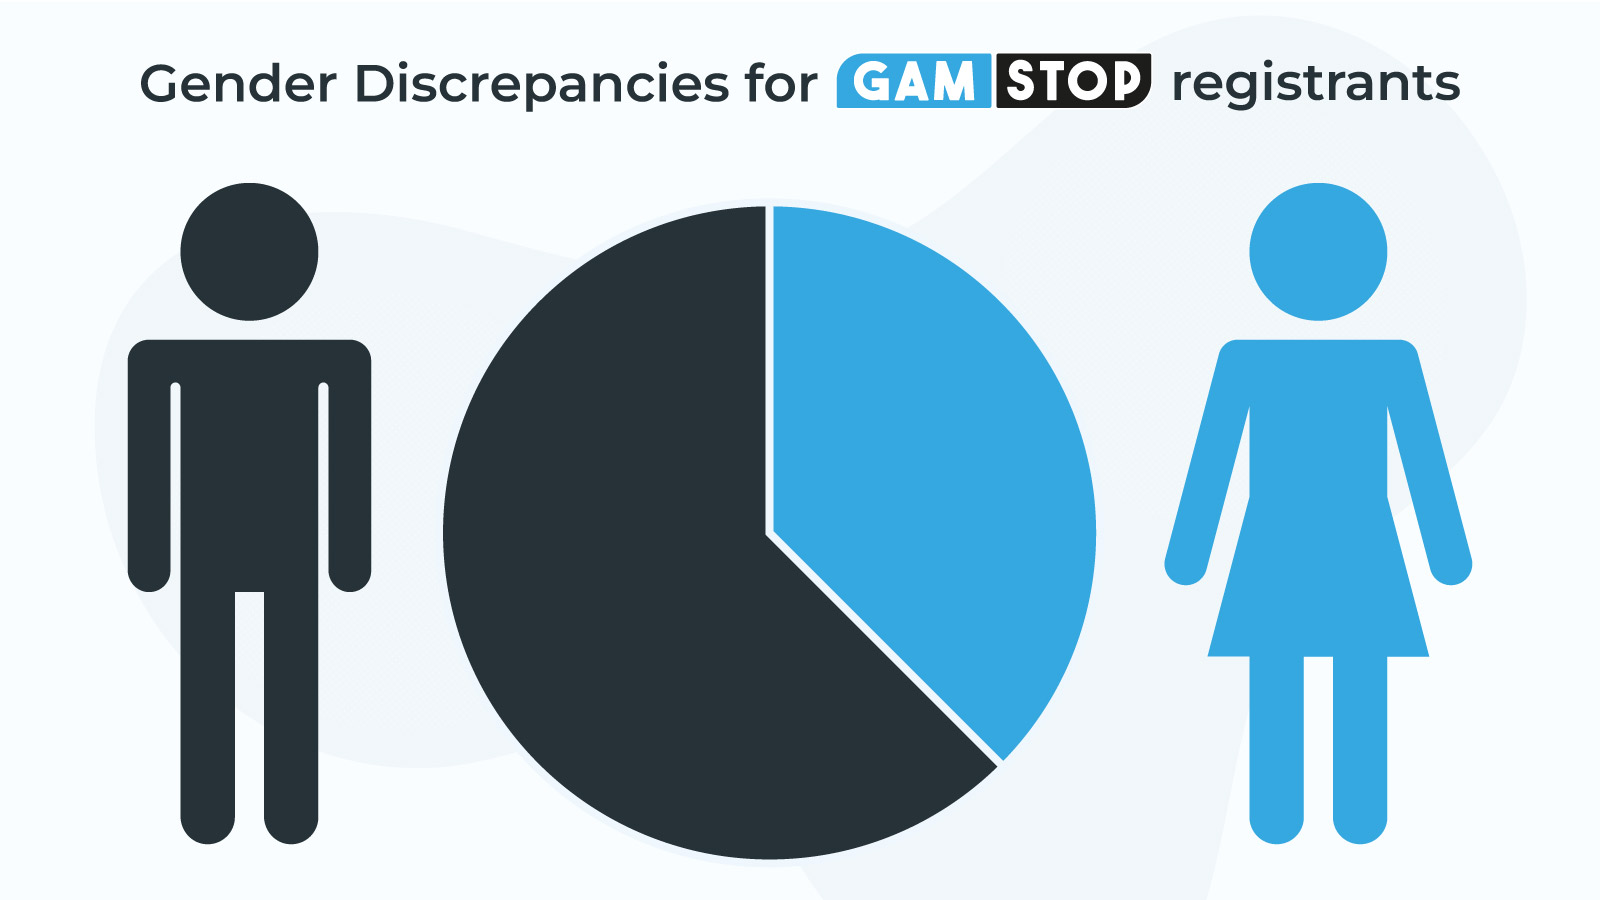 GAMSTOP gambling exclusion related customers differ based on gender